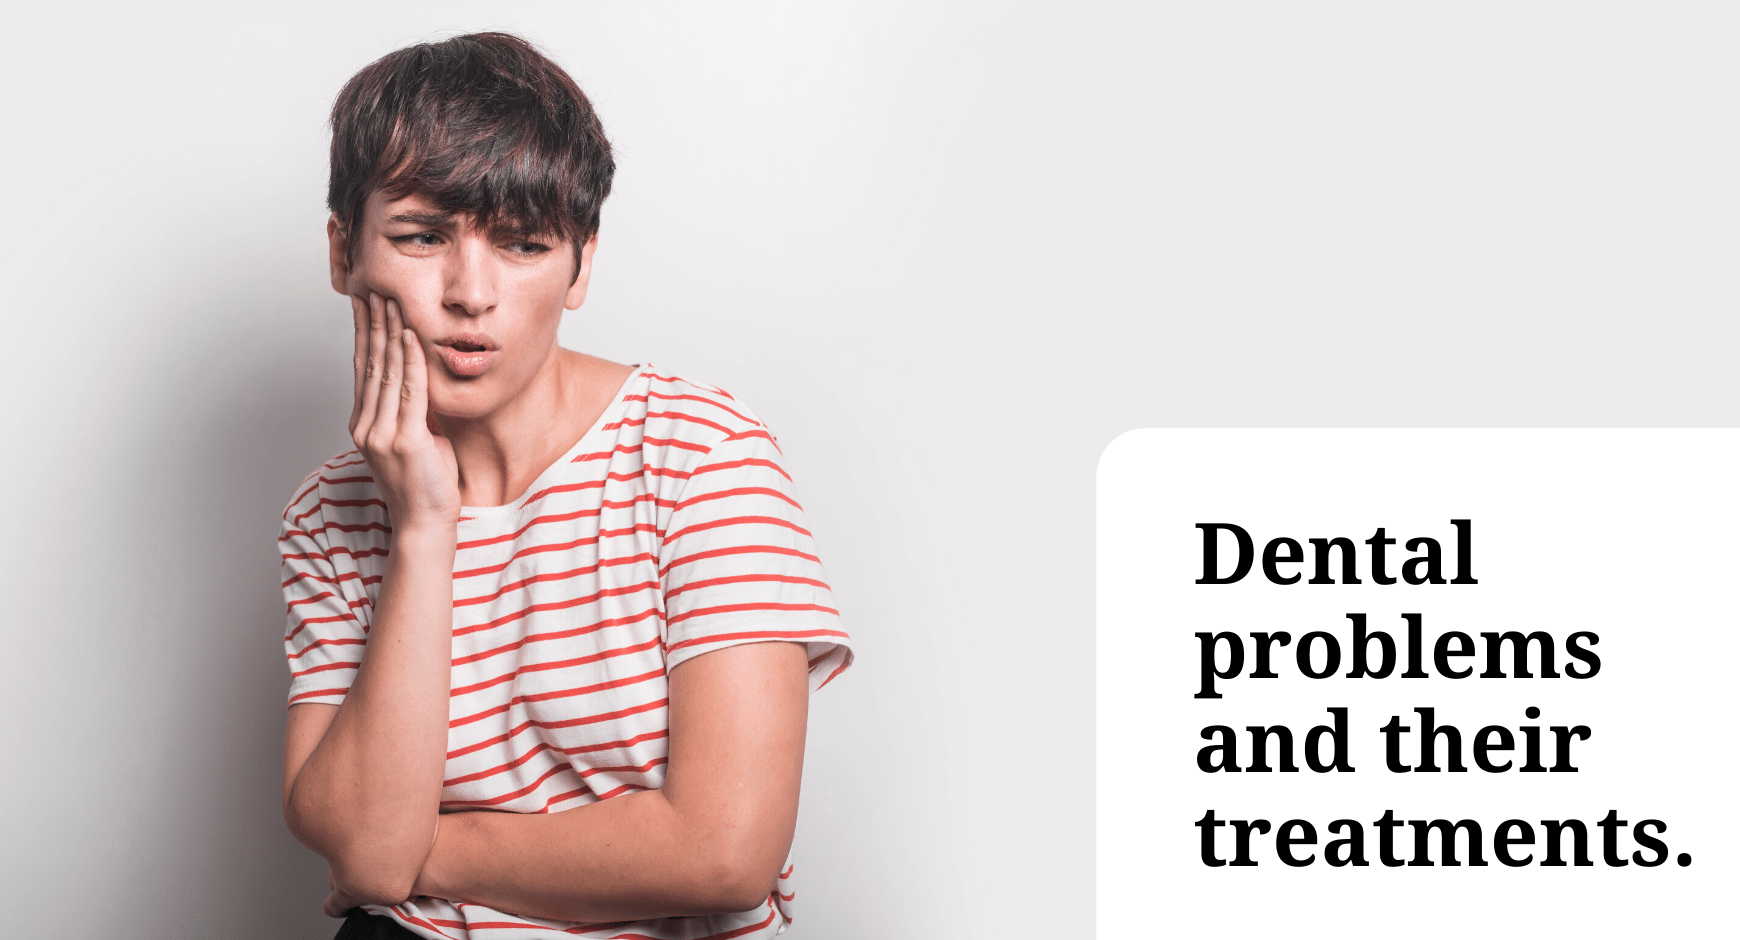 All you need to know about dental problems and their treatments